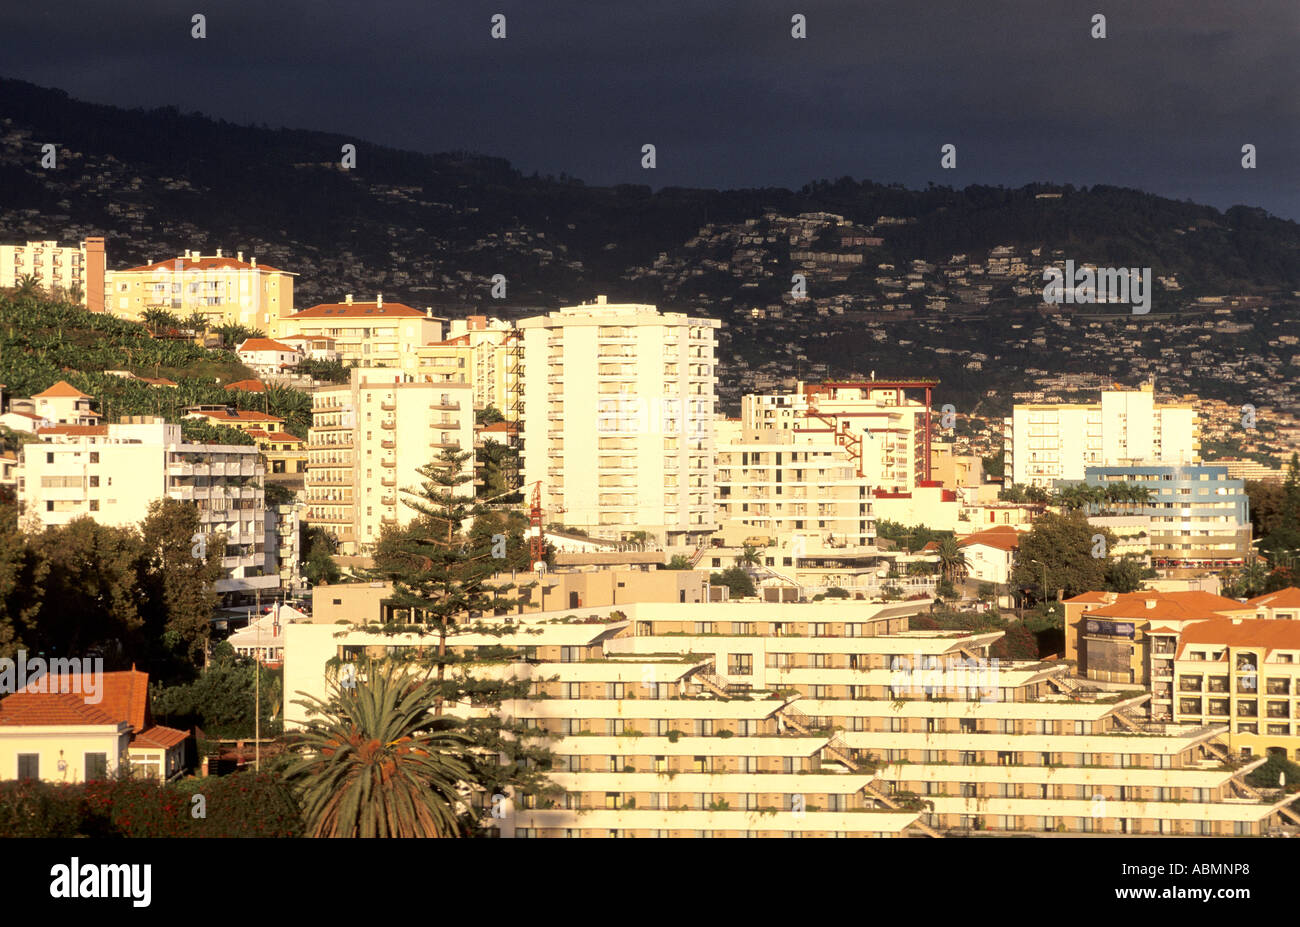 Hotel buildings at Funchal, Madeira Stock Photo